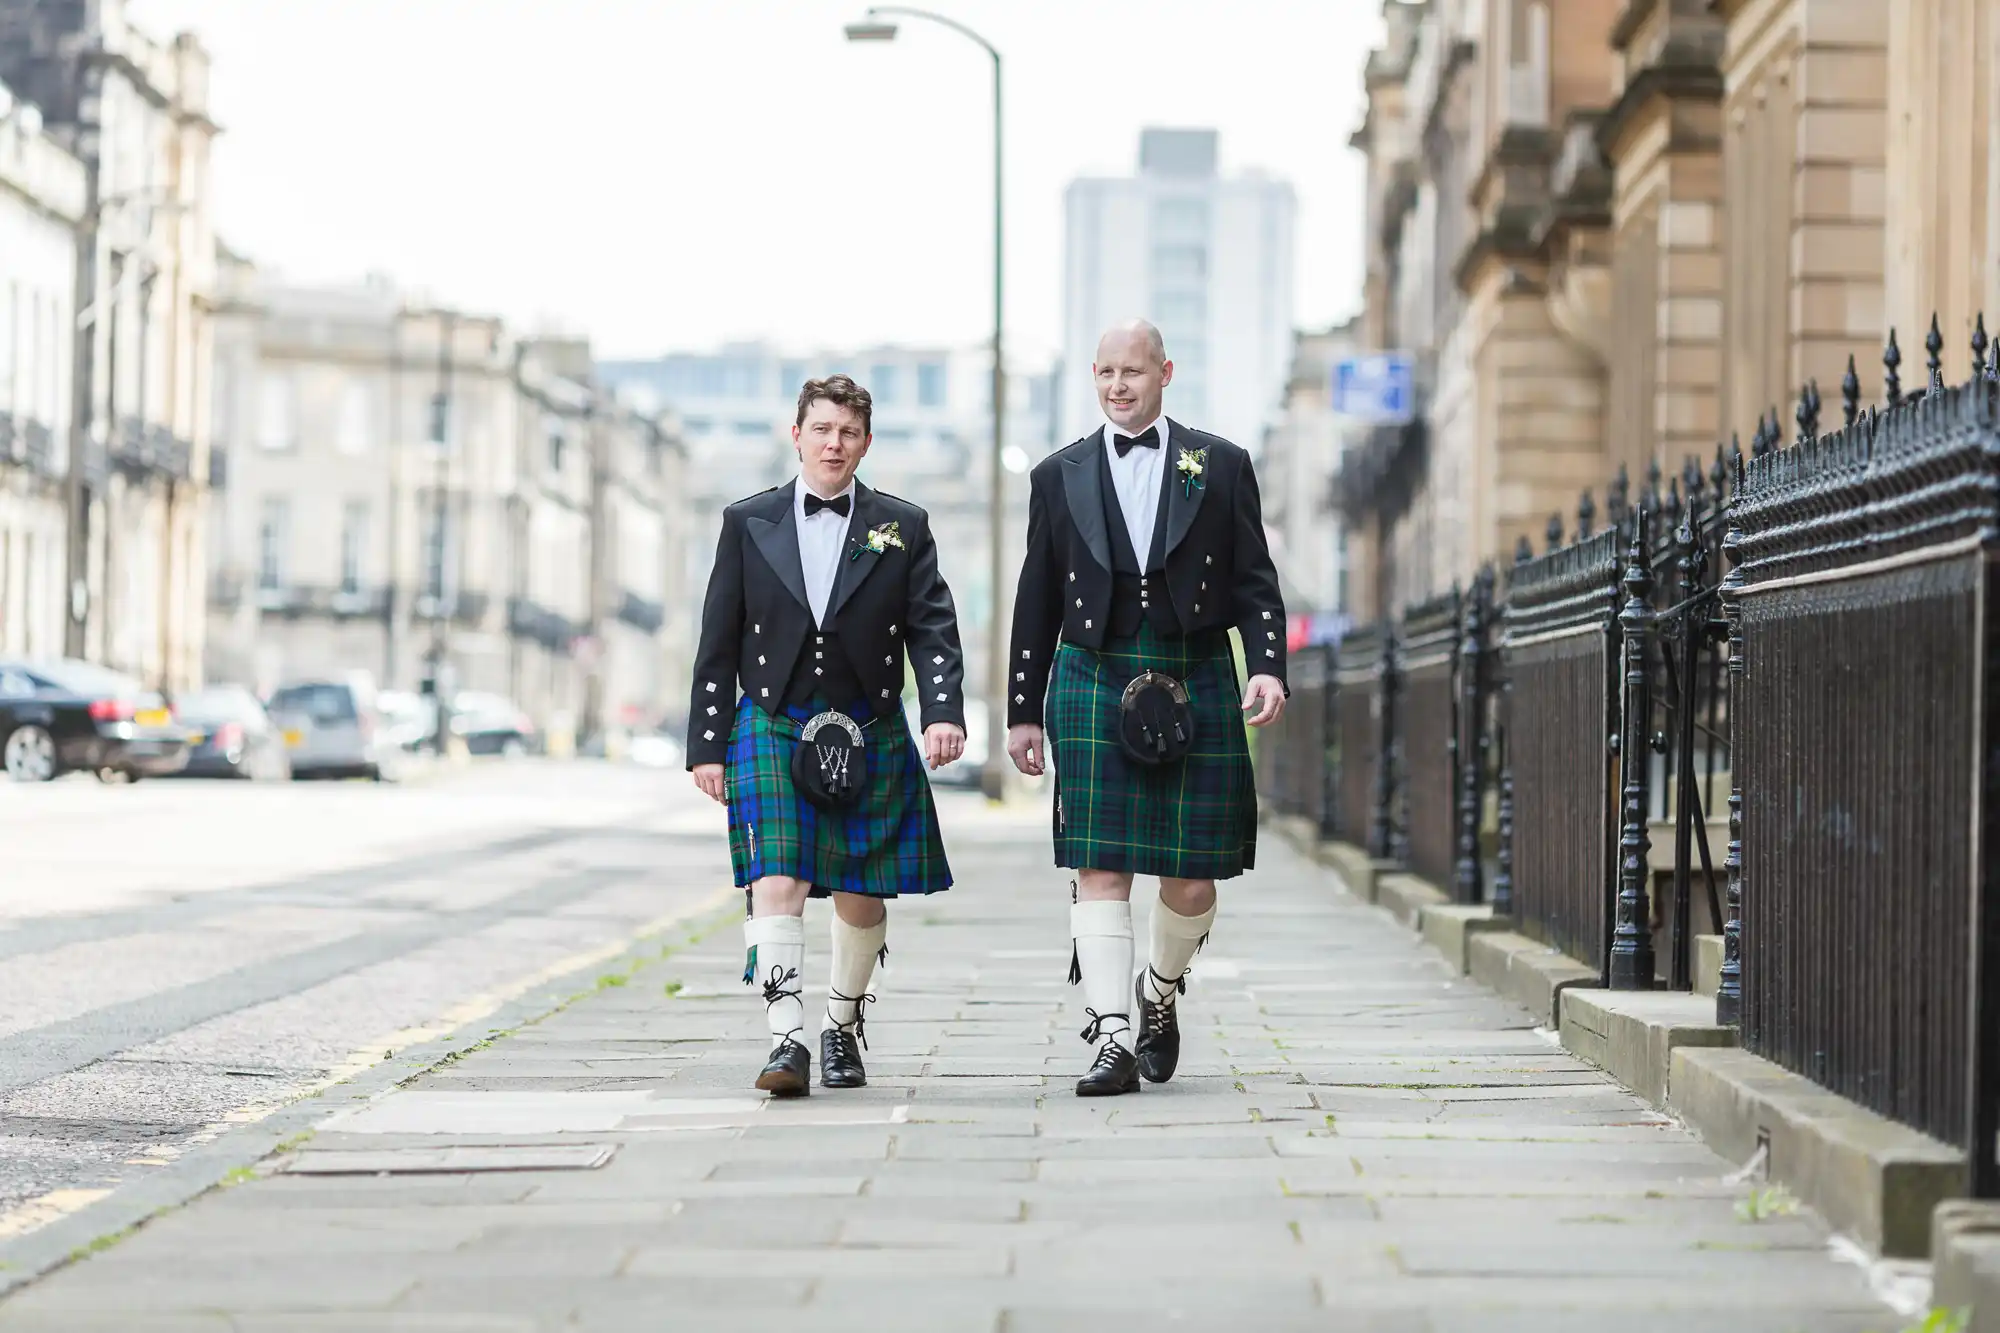 Two men dressed in traditional scottish kilts and jackets walking along a city street, with buildings and parked cars in the background.